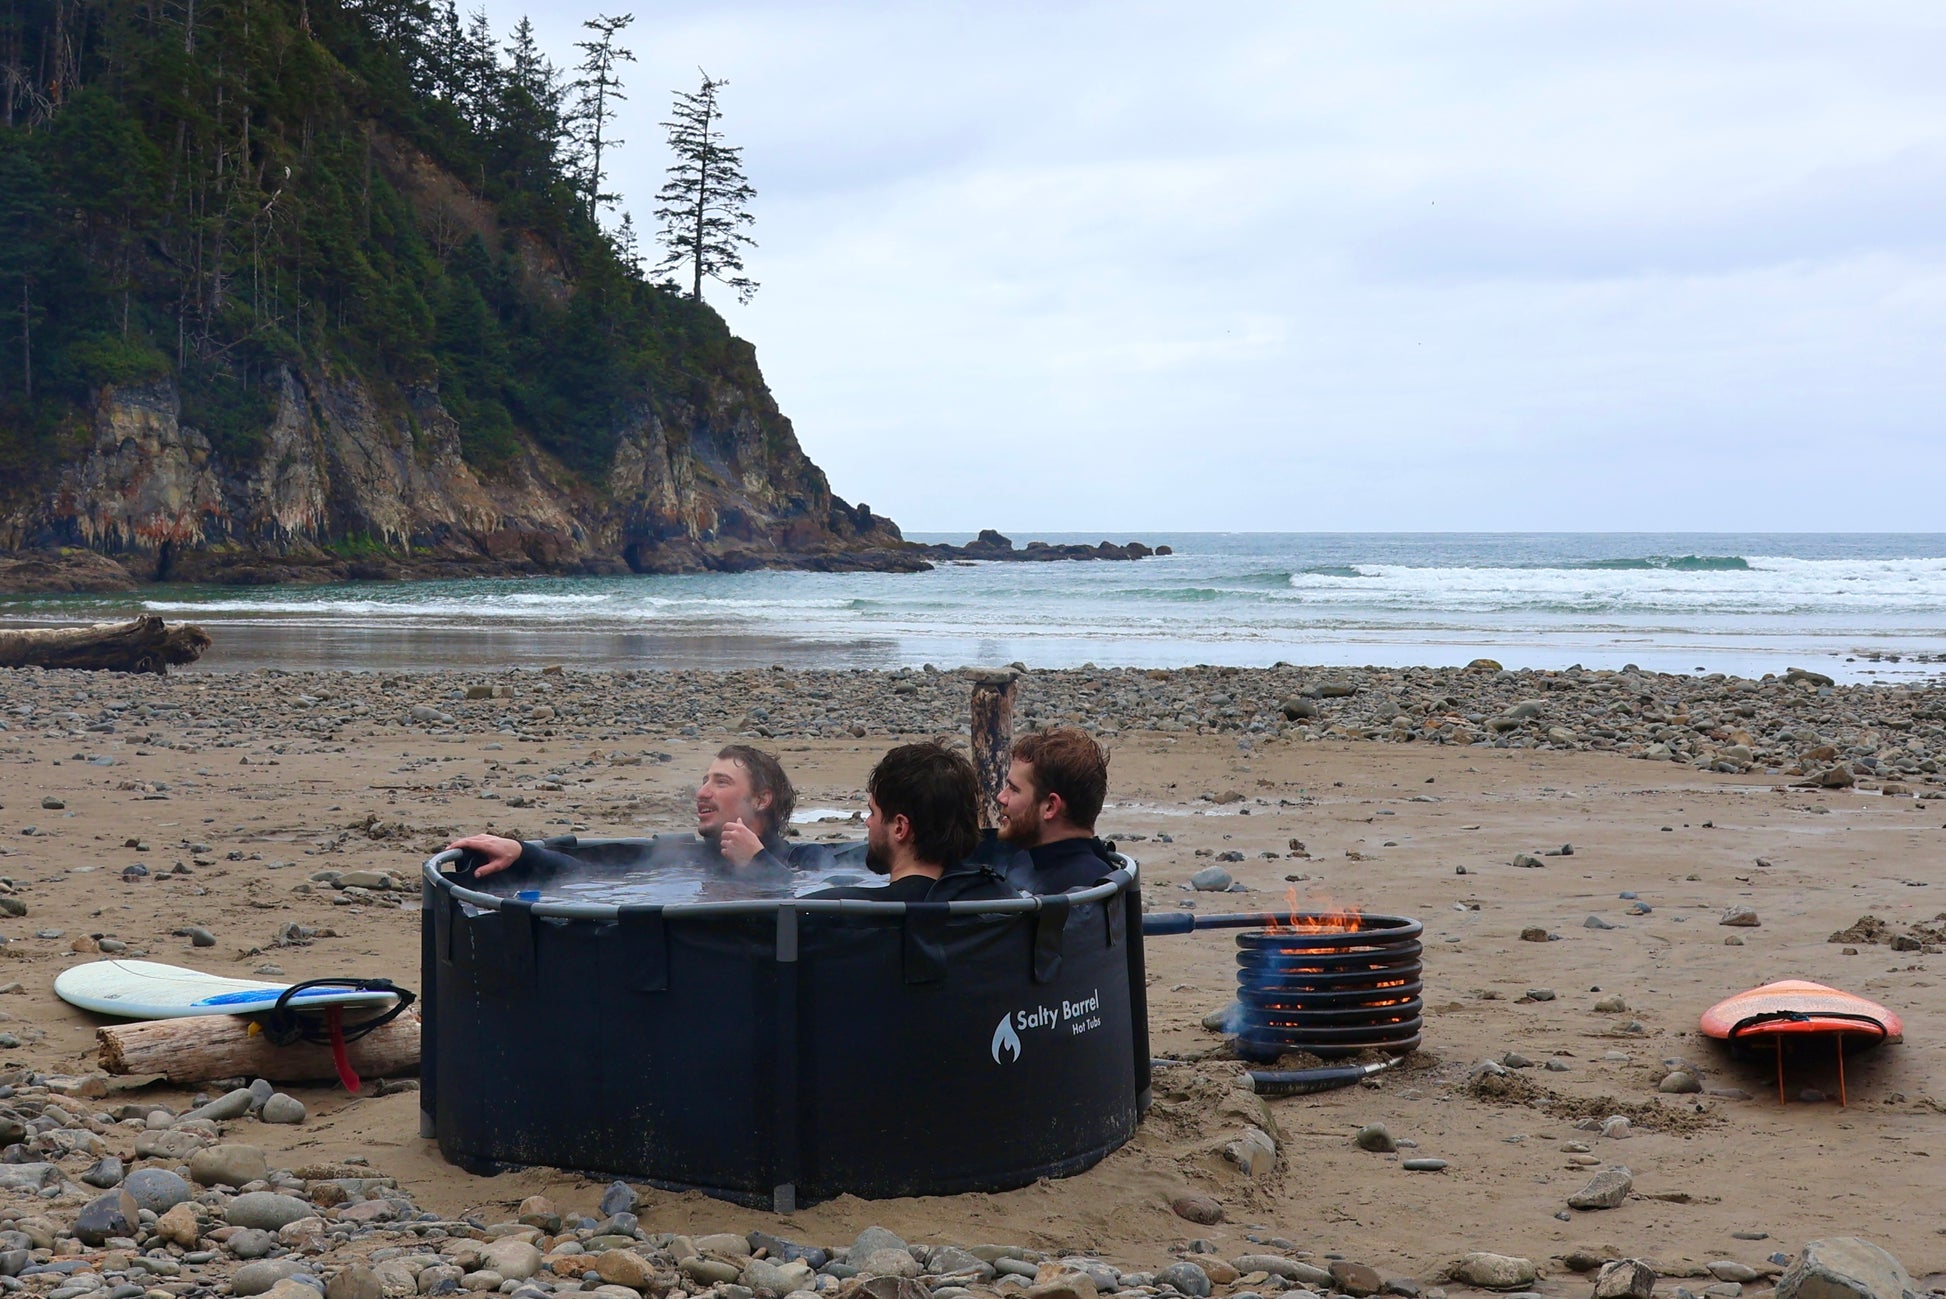 Surfers warming up in off grid spa at the beach